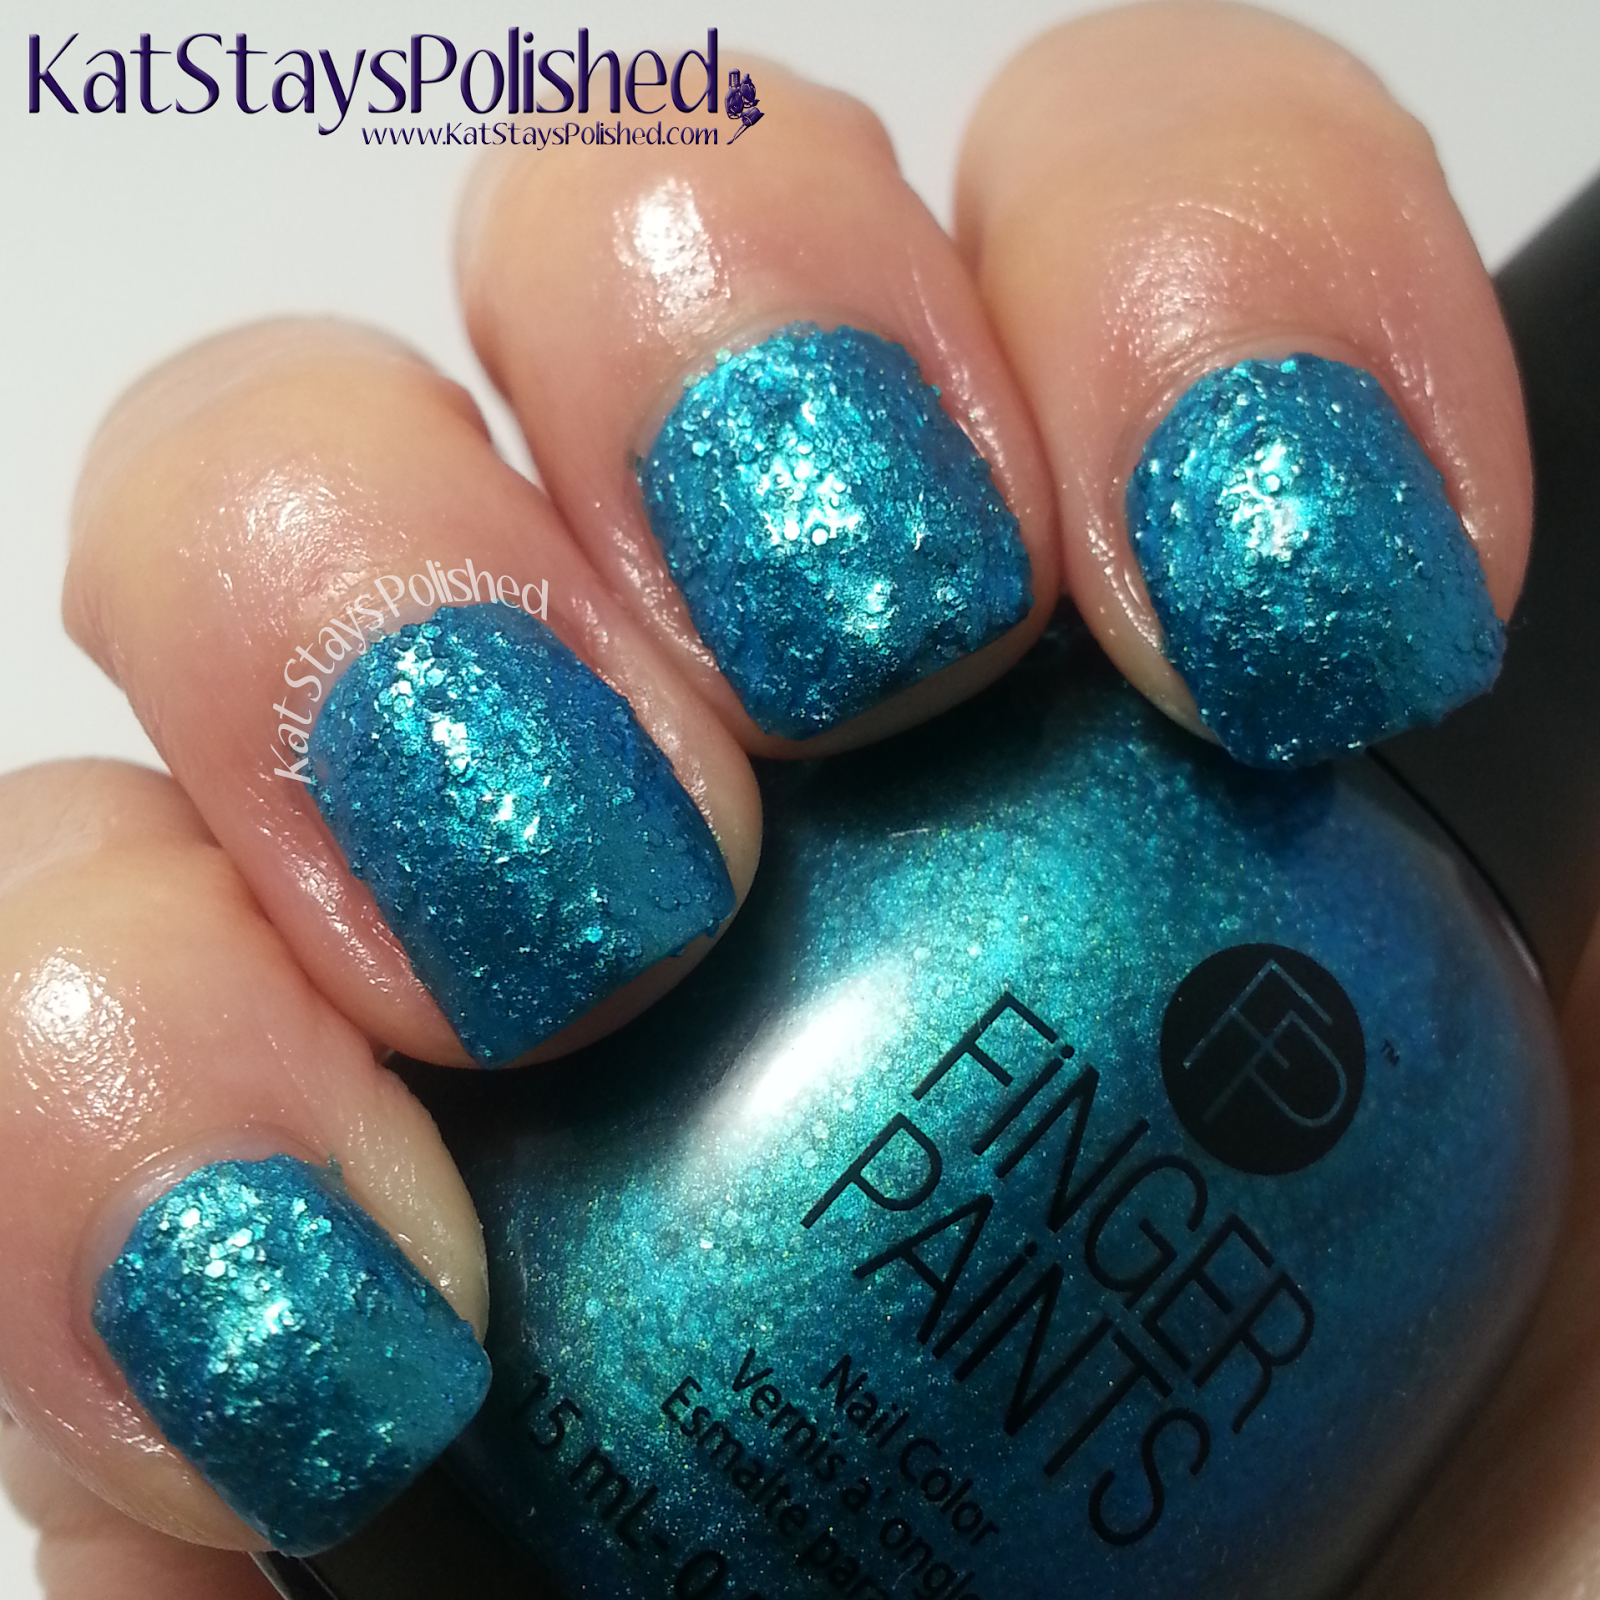 FingerPaints - Enchanted Mermaid 2014 - Tails of Love | Kat Stays Polished